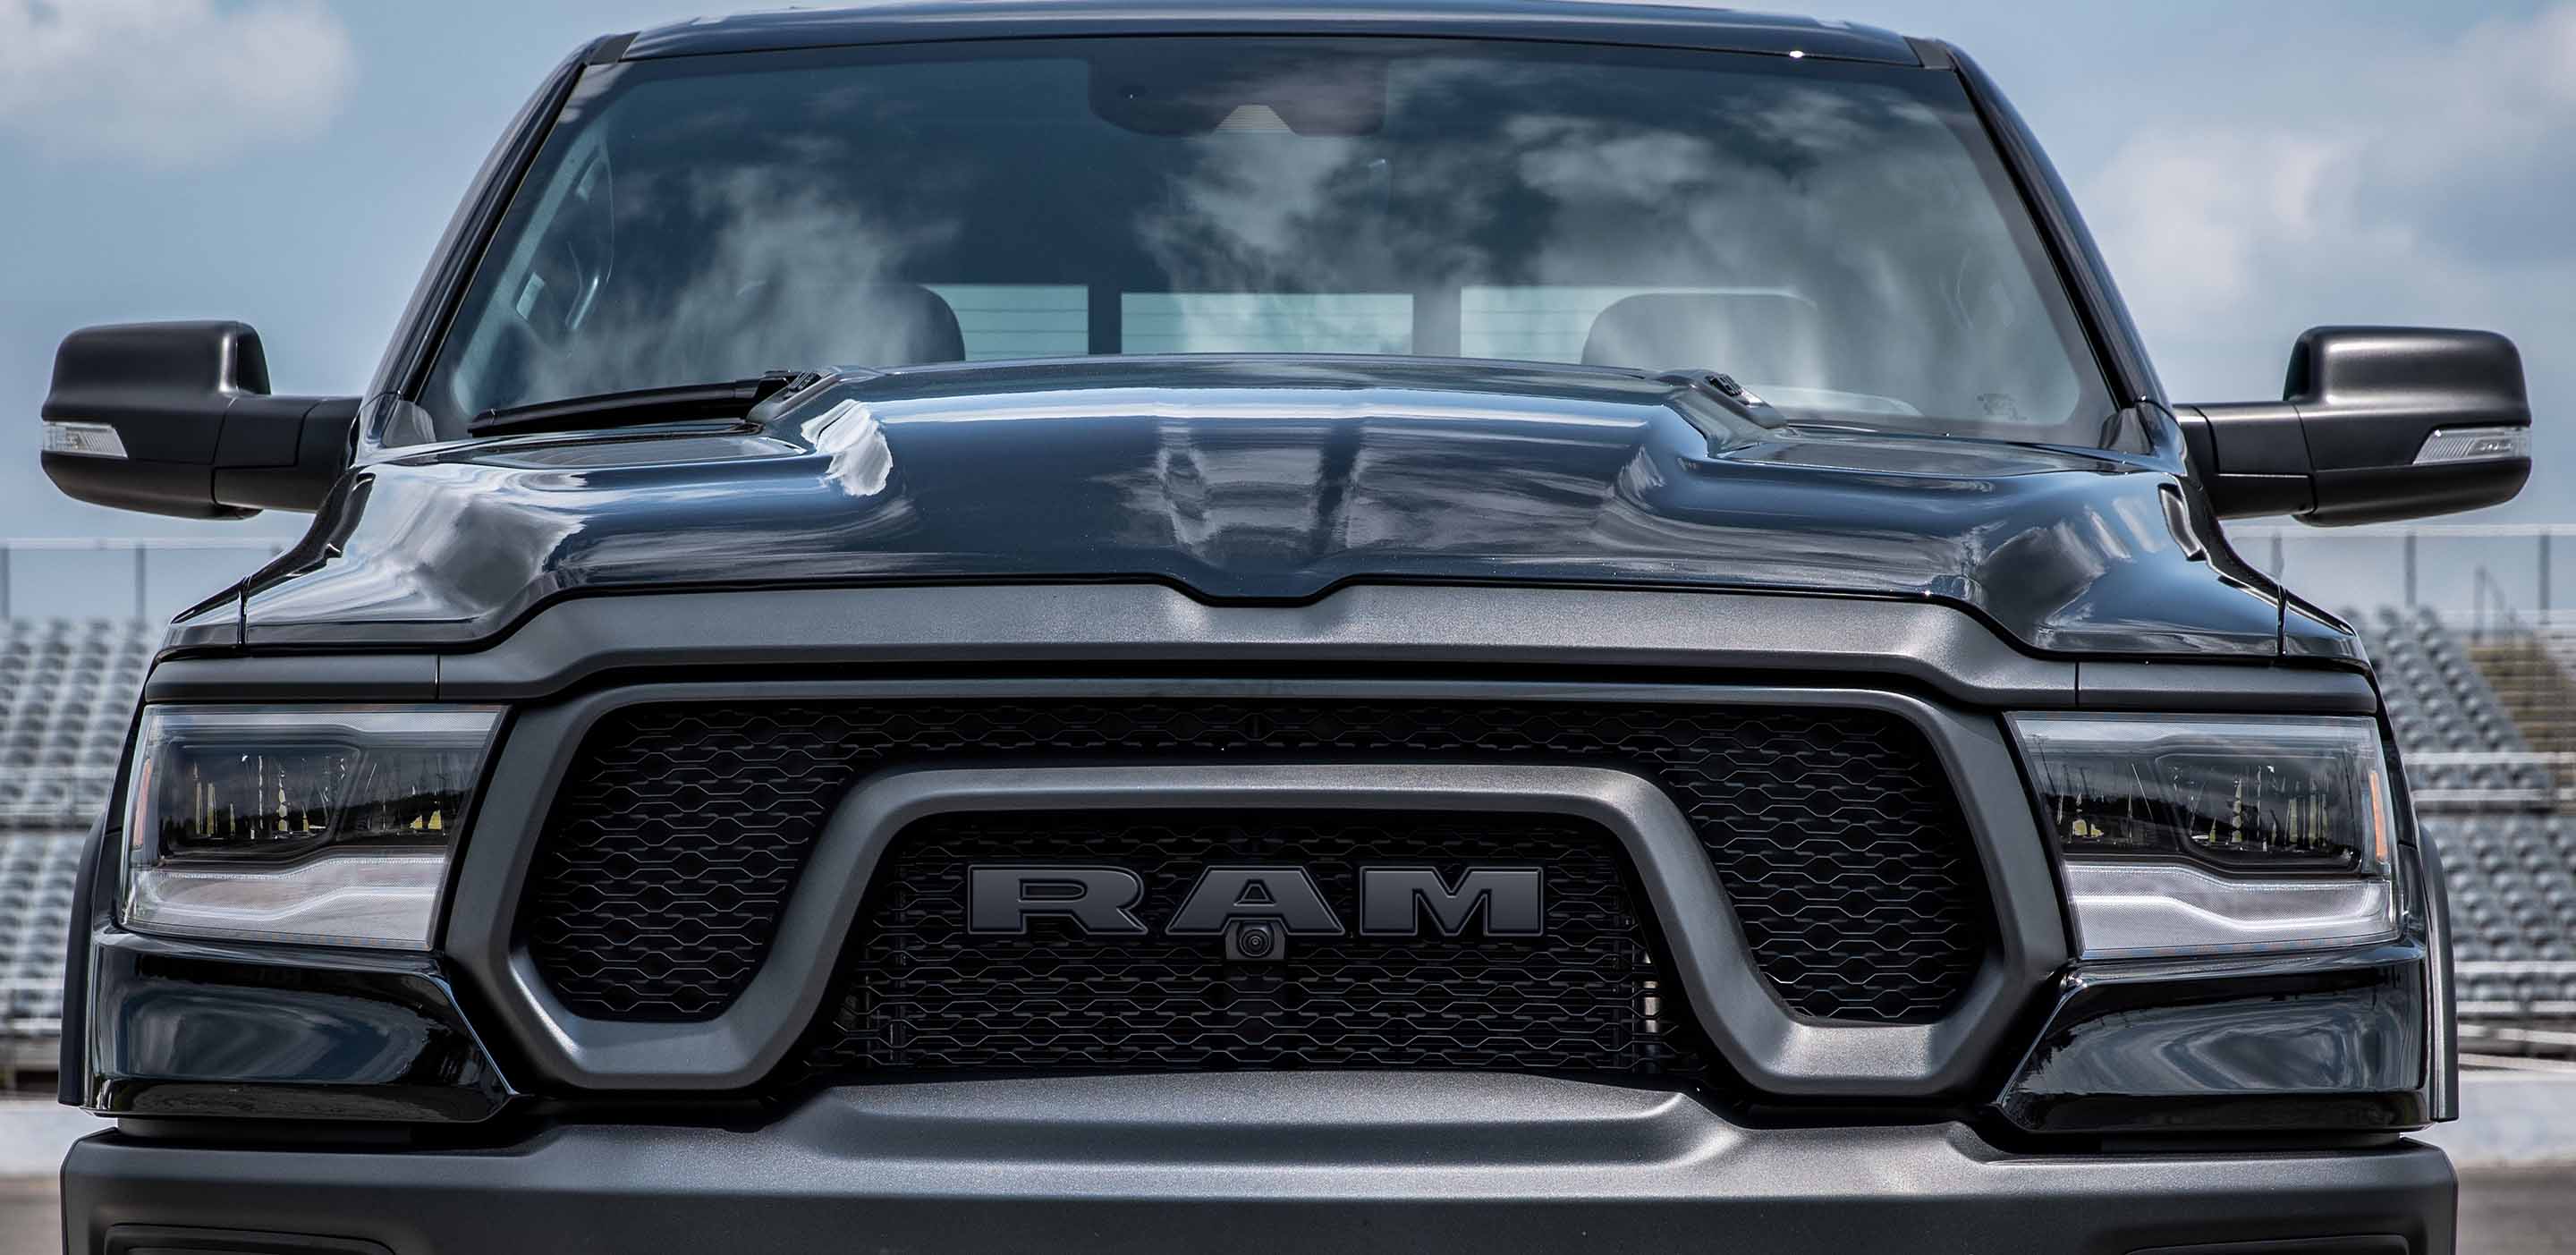 Display A head-on angle of the 2024 Ram 1500 Rebel, focusing on the grille and headlamps.